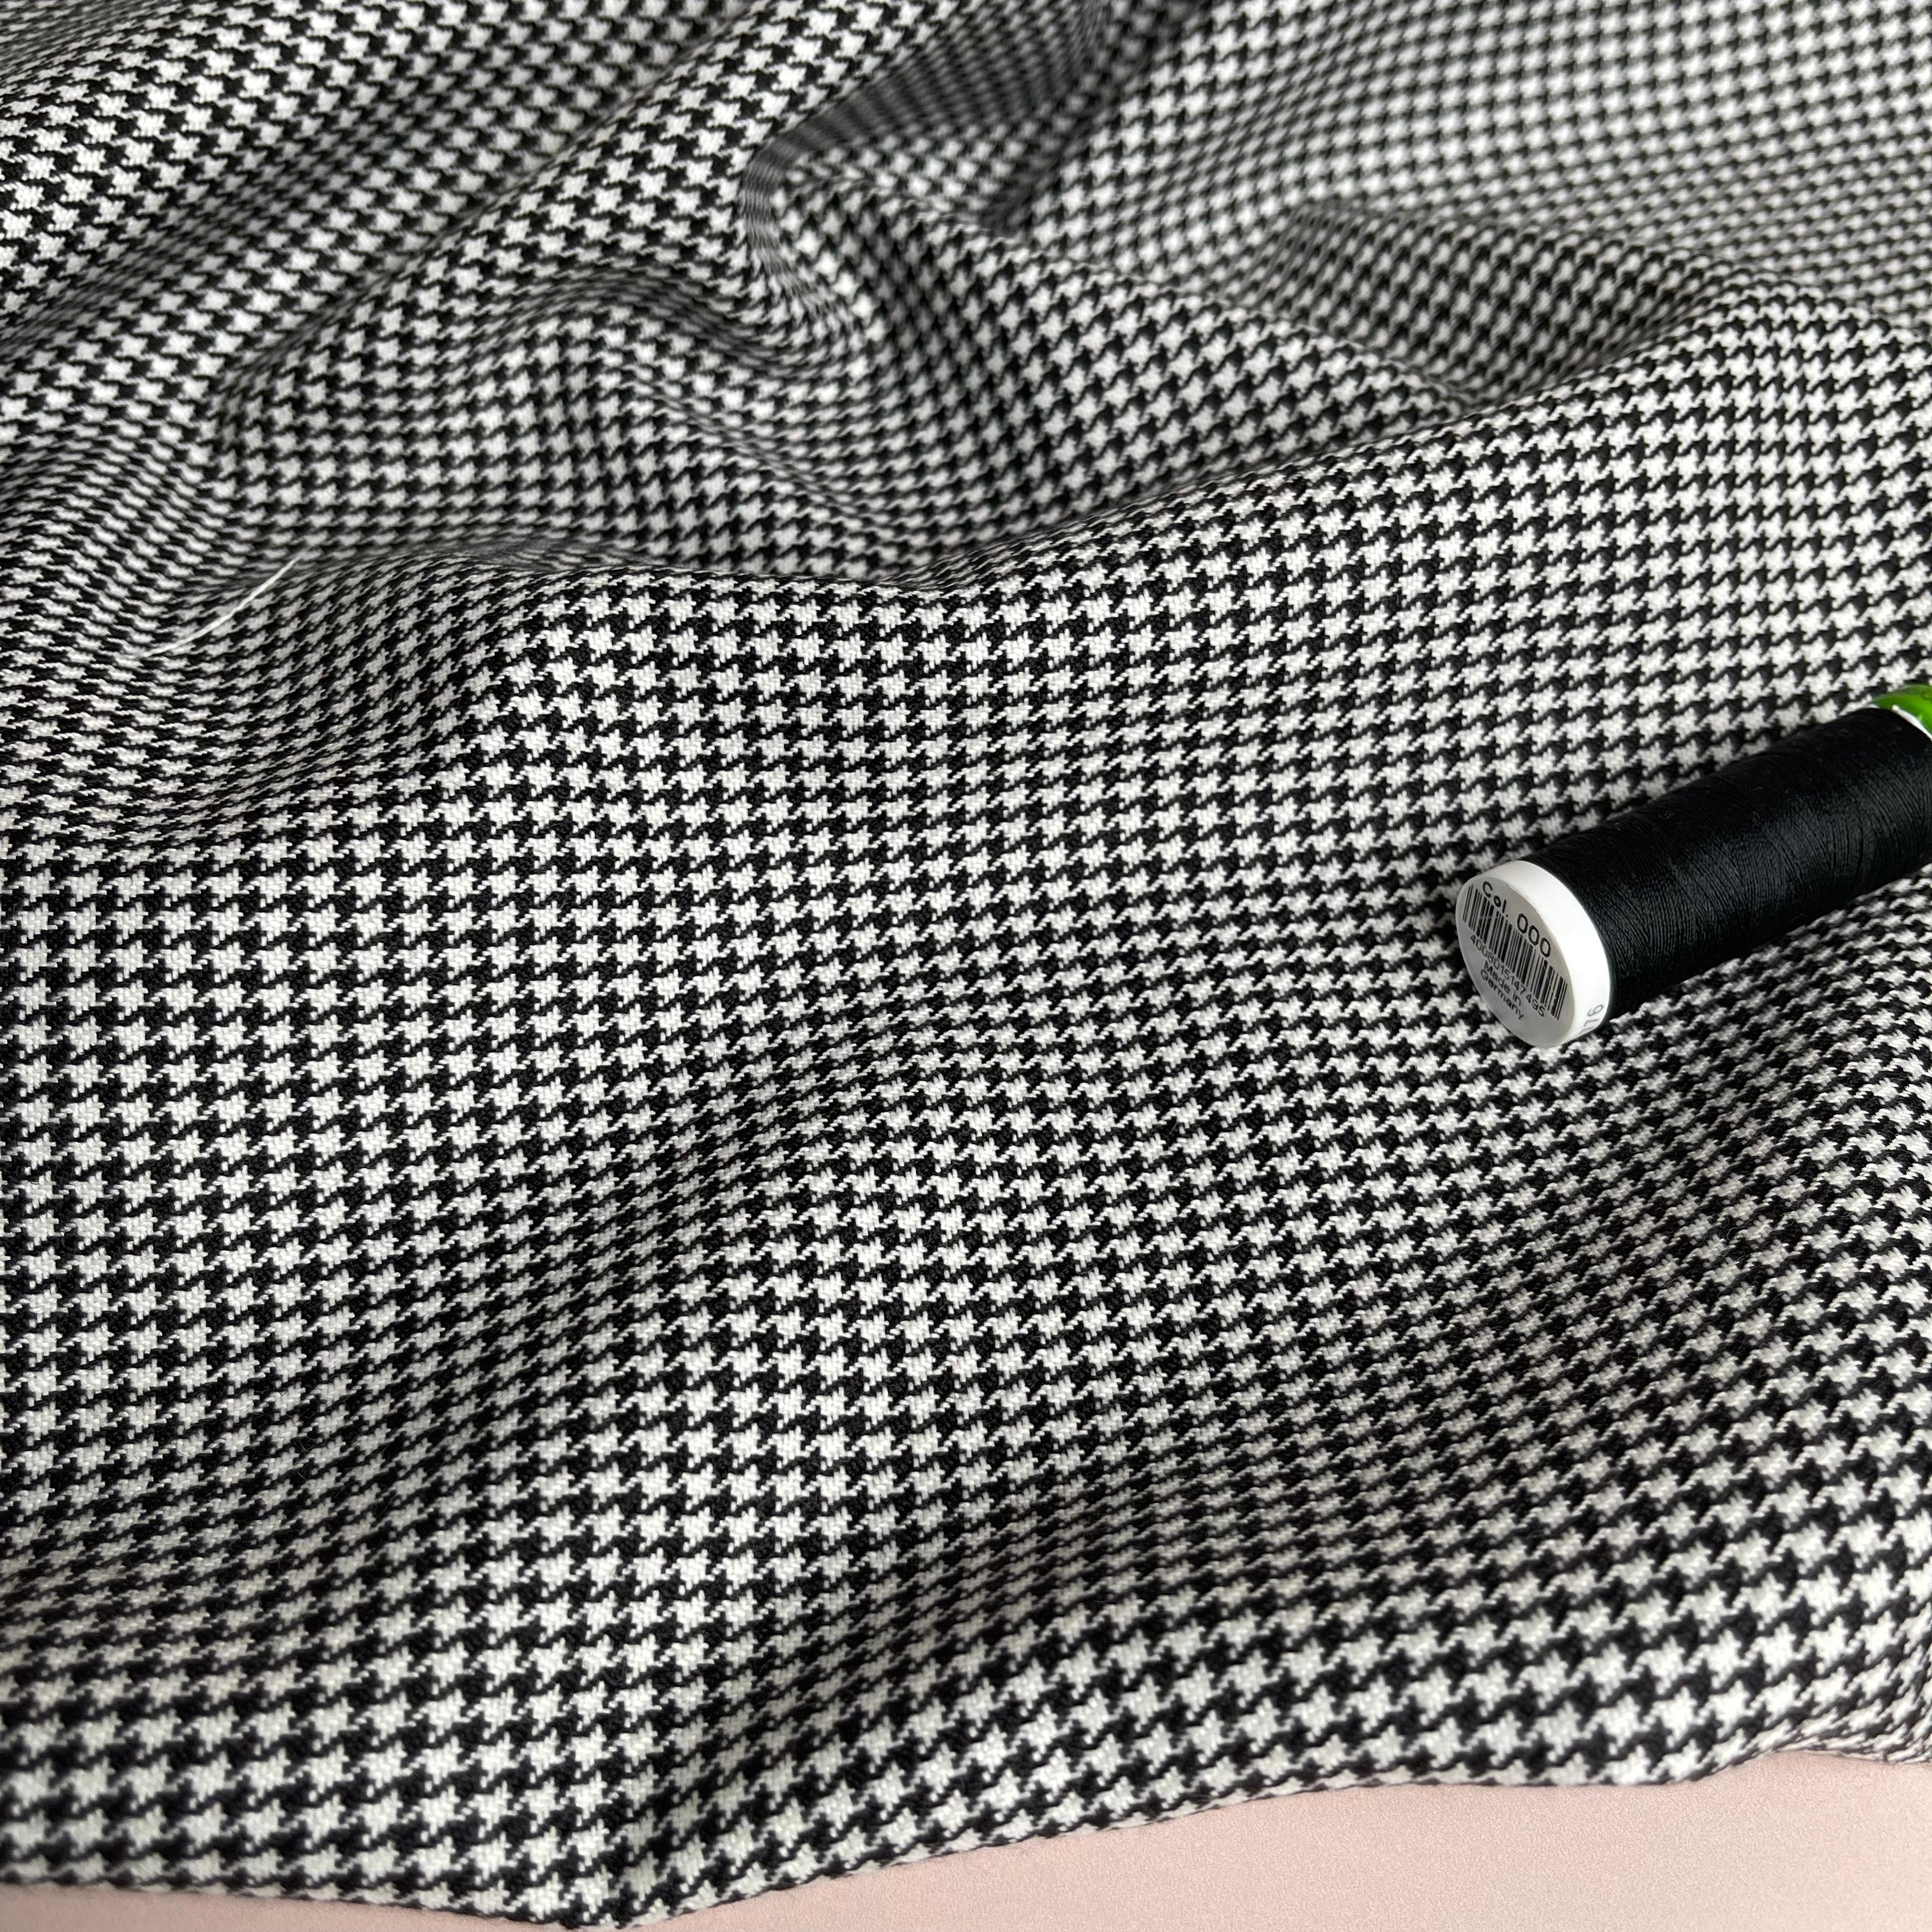 Deadstock Houndstooth Wool Blend Suiting Fabric